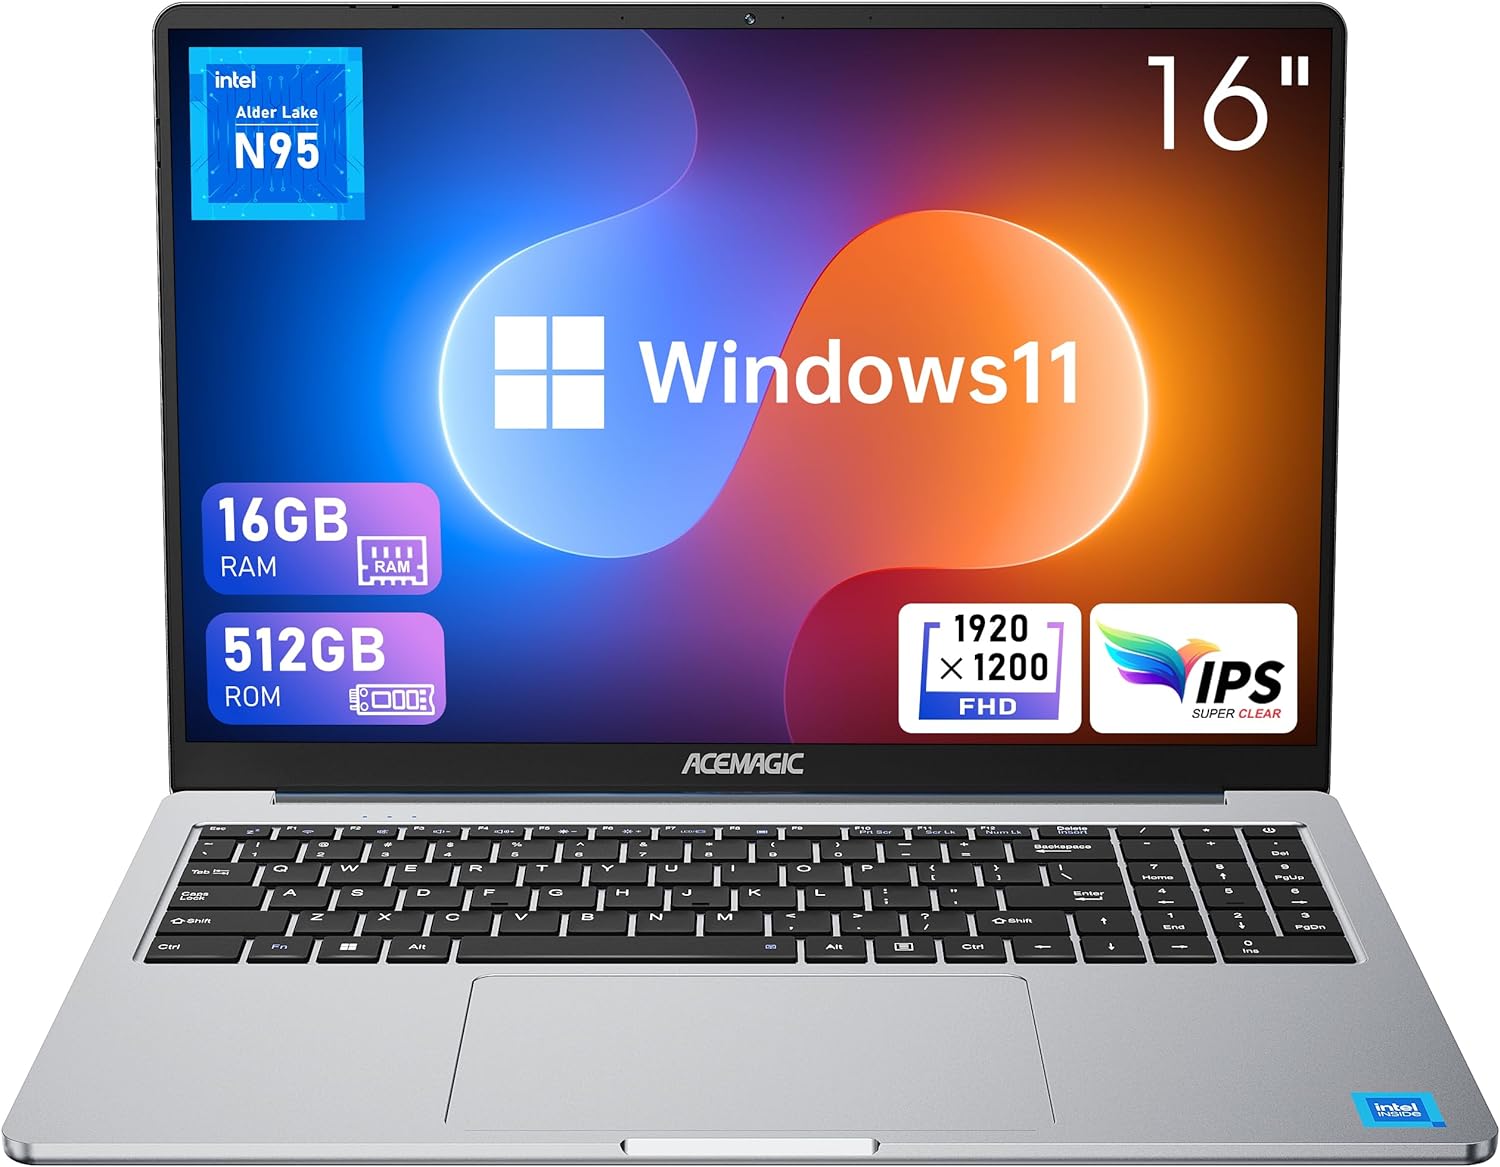 ACEMAGIC Laptop 16 inch FHD Display, 16GB RAM 512GB ROM with Intel 12th Gen Alder Lake N95(4C/4T, Up to 3.4GHz) Laptop Computer Support WiFi, BT5.0, Webcam, 3*USB3.2, Type-C